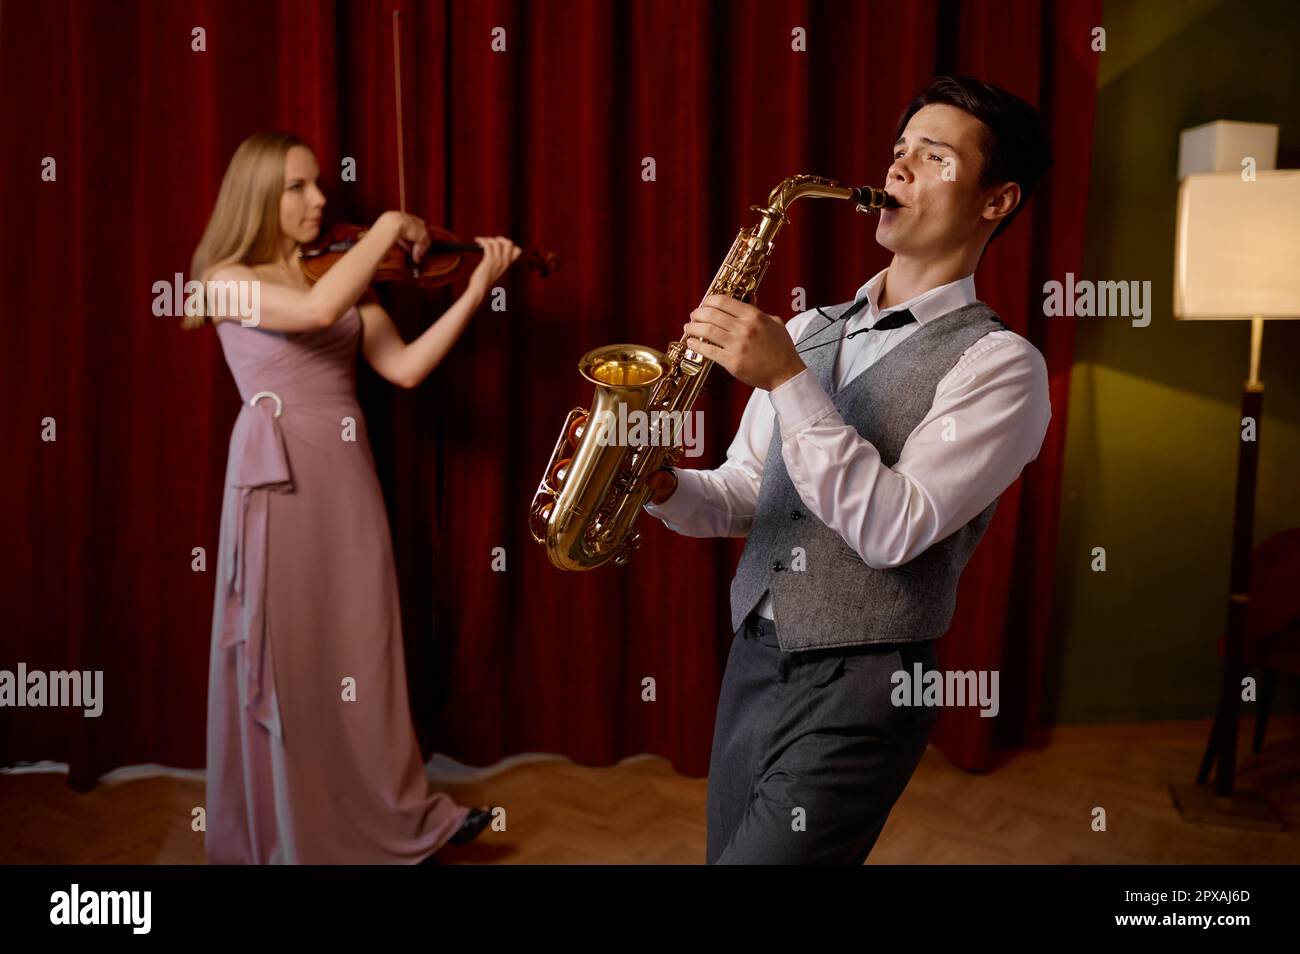 Sax man and woman fiddler duet playing classical melody. Musical duo jazz band on the stage in action Stock Photo